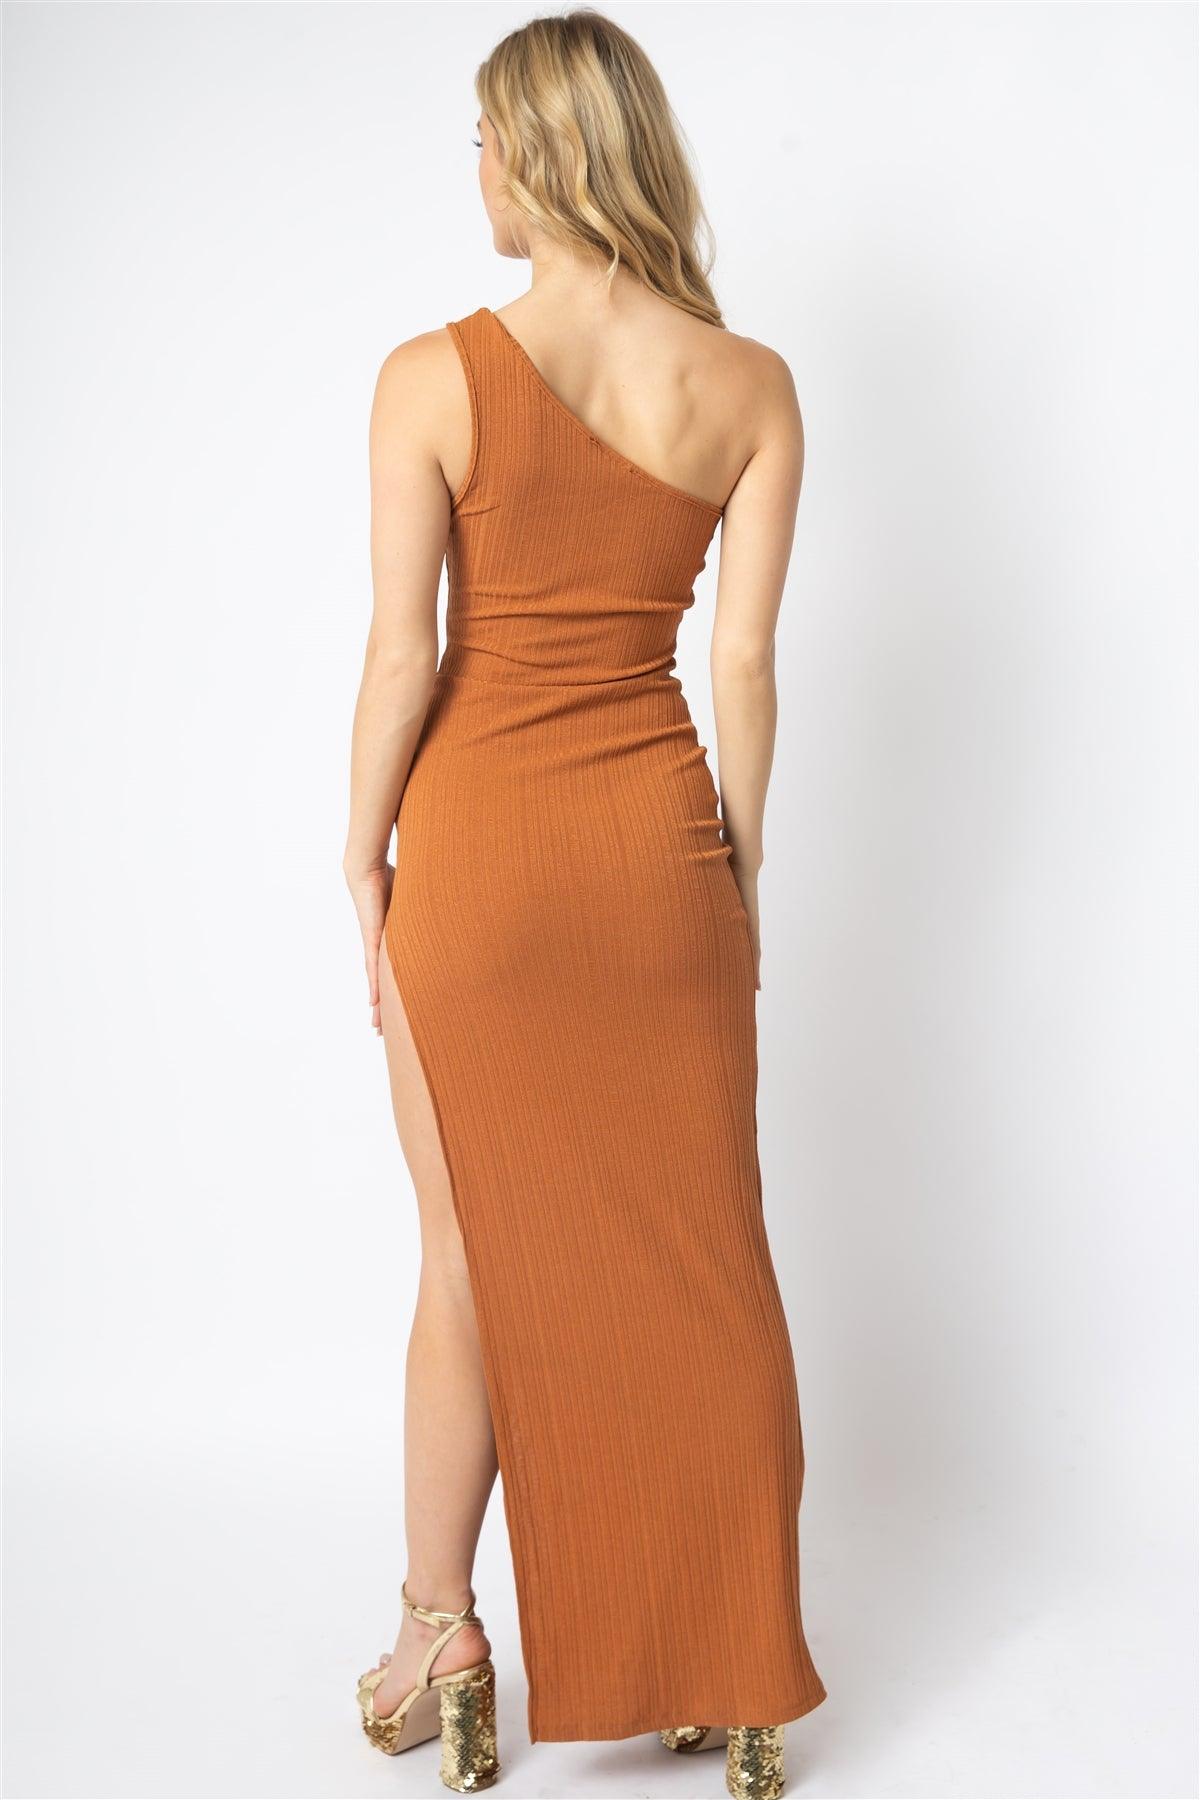 Lexie Rust Ribbed One Shoulder Maxi Dress